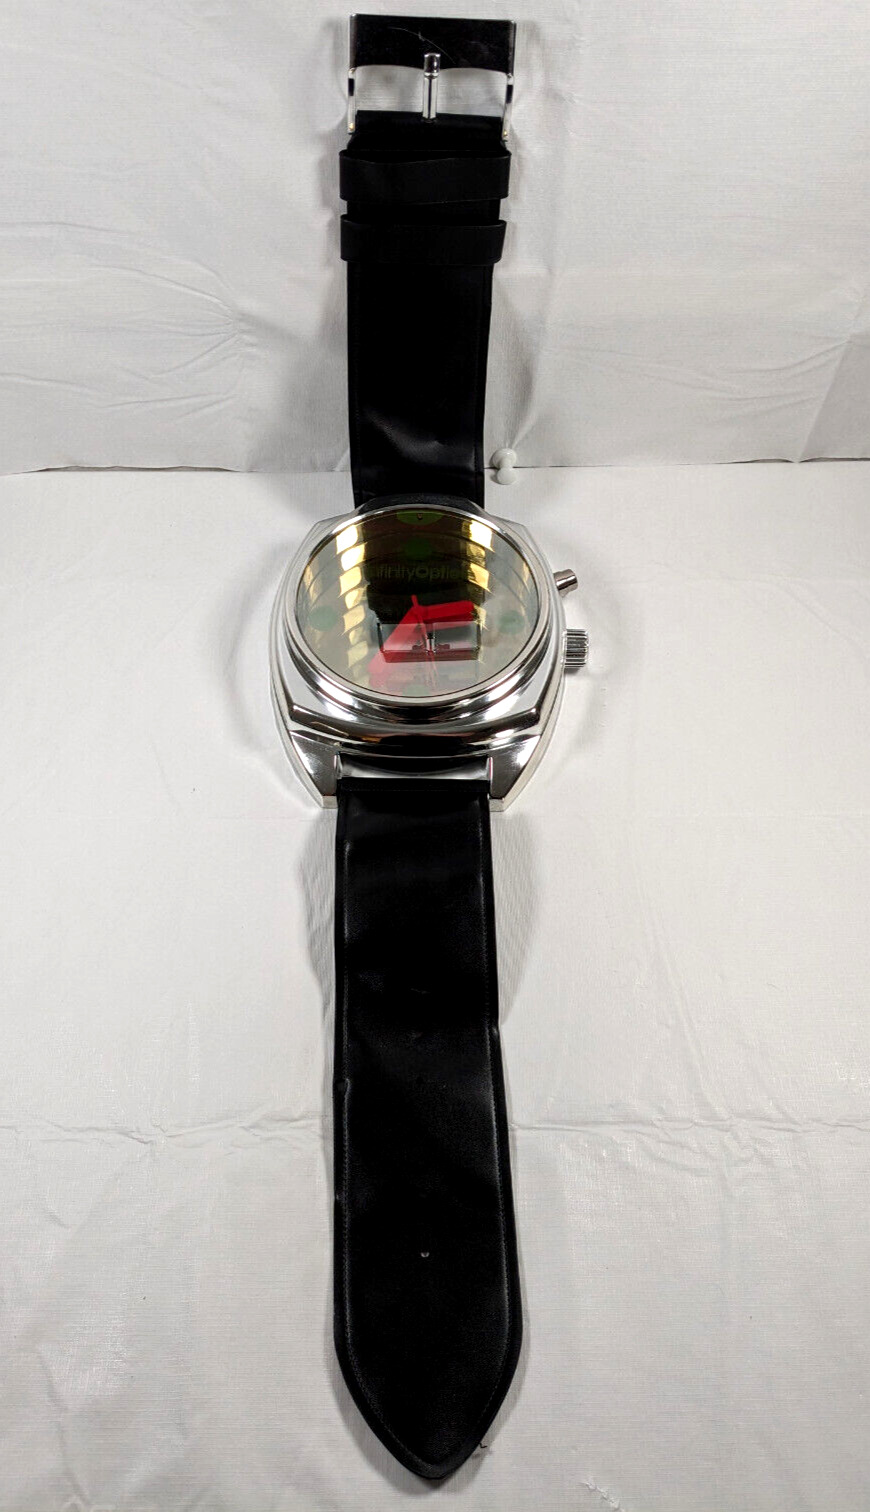 Vintage Infinity Optics Large Novelty Wrist Watch Wall Clock with AC Adapter